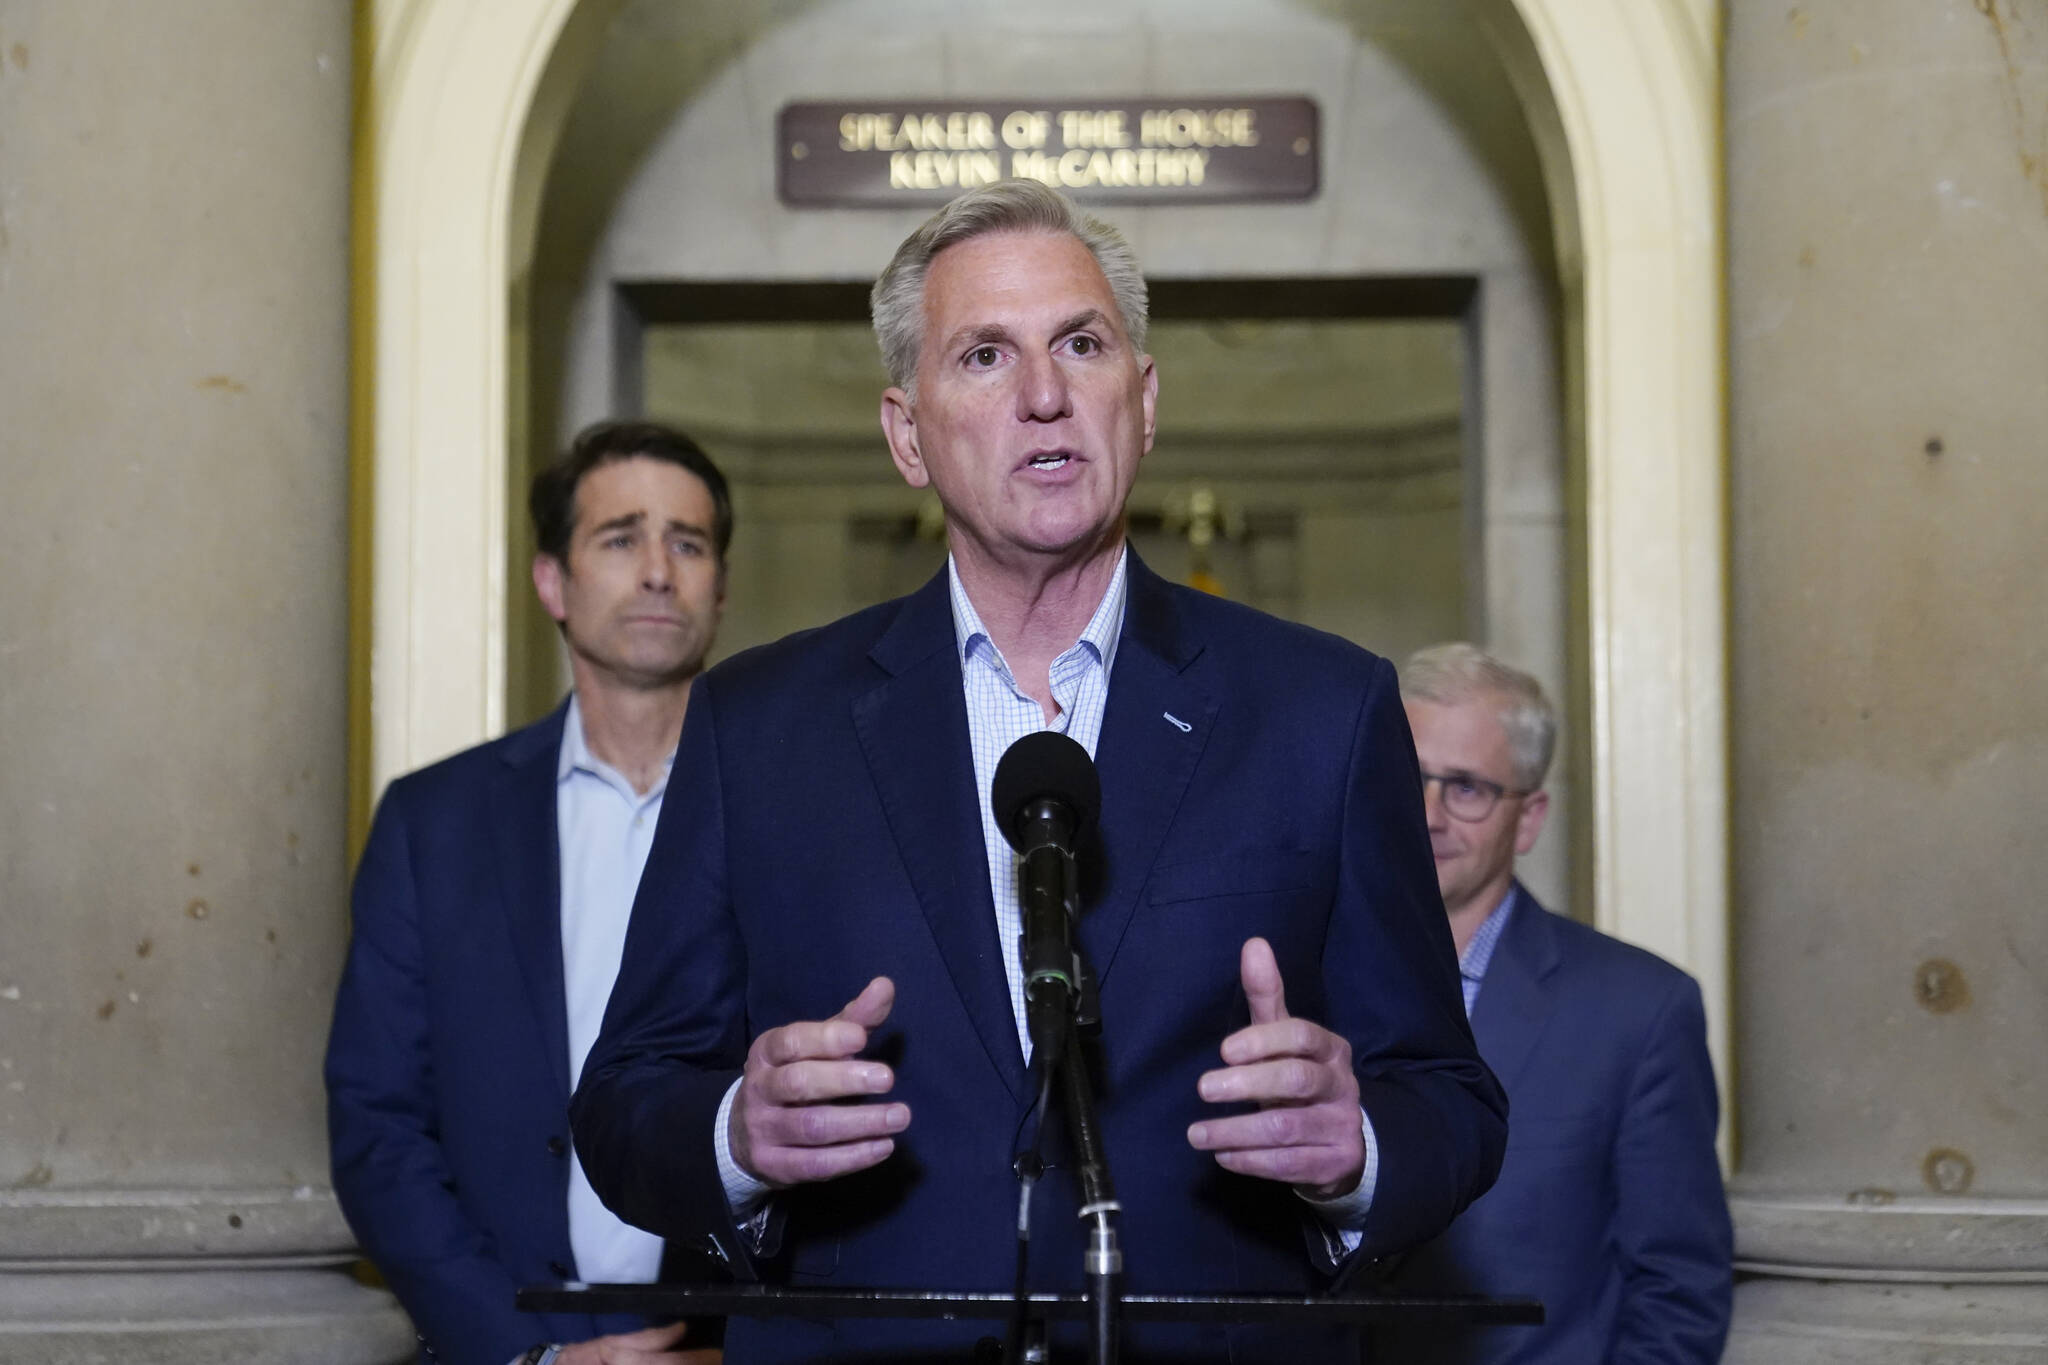 House Speaker Kevin McCarthy of Calif., speaks during a news conference after President Joe Biden and McCarthy reached an “agreement in principle” to resolve the looming debt crisis on Saturday, May 27, 2023, on Capitol Hill in Washington. Rep. Patrick McHenry, R-N.C., a key Republican in the debt limit negotiations and chairman of the House Financial Services Committee, back right, and Rep. Garret Graves, R-La., McCarthy’s top mediator in the debt limit talks, left, look on. (AP Photo / Patrick Semansky)